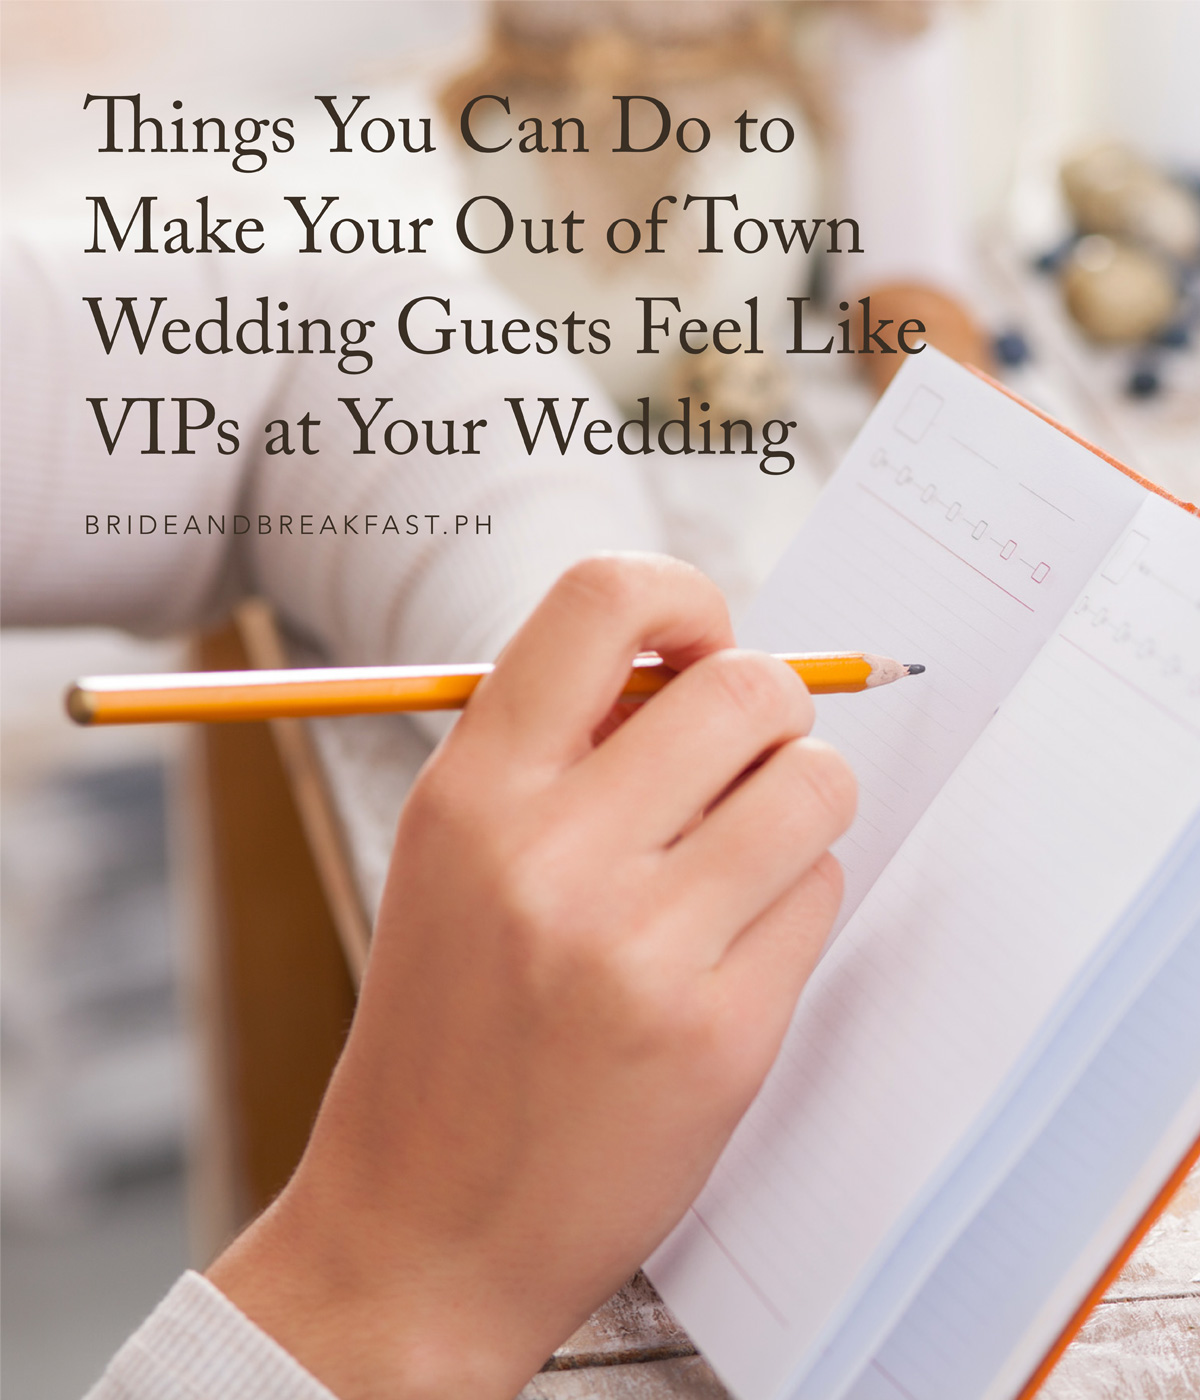 Things You Can Do to Make Your Out of Town Wedding Guests Feel Like VIPs at Your Wedding